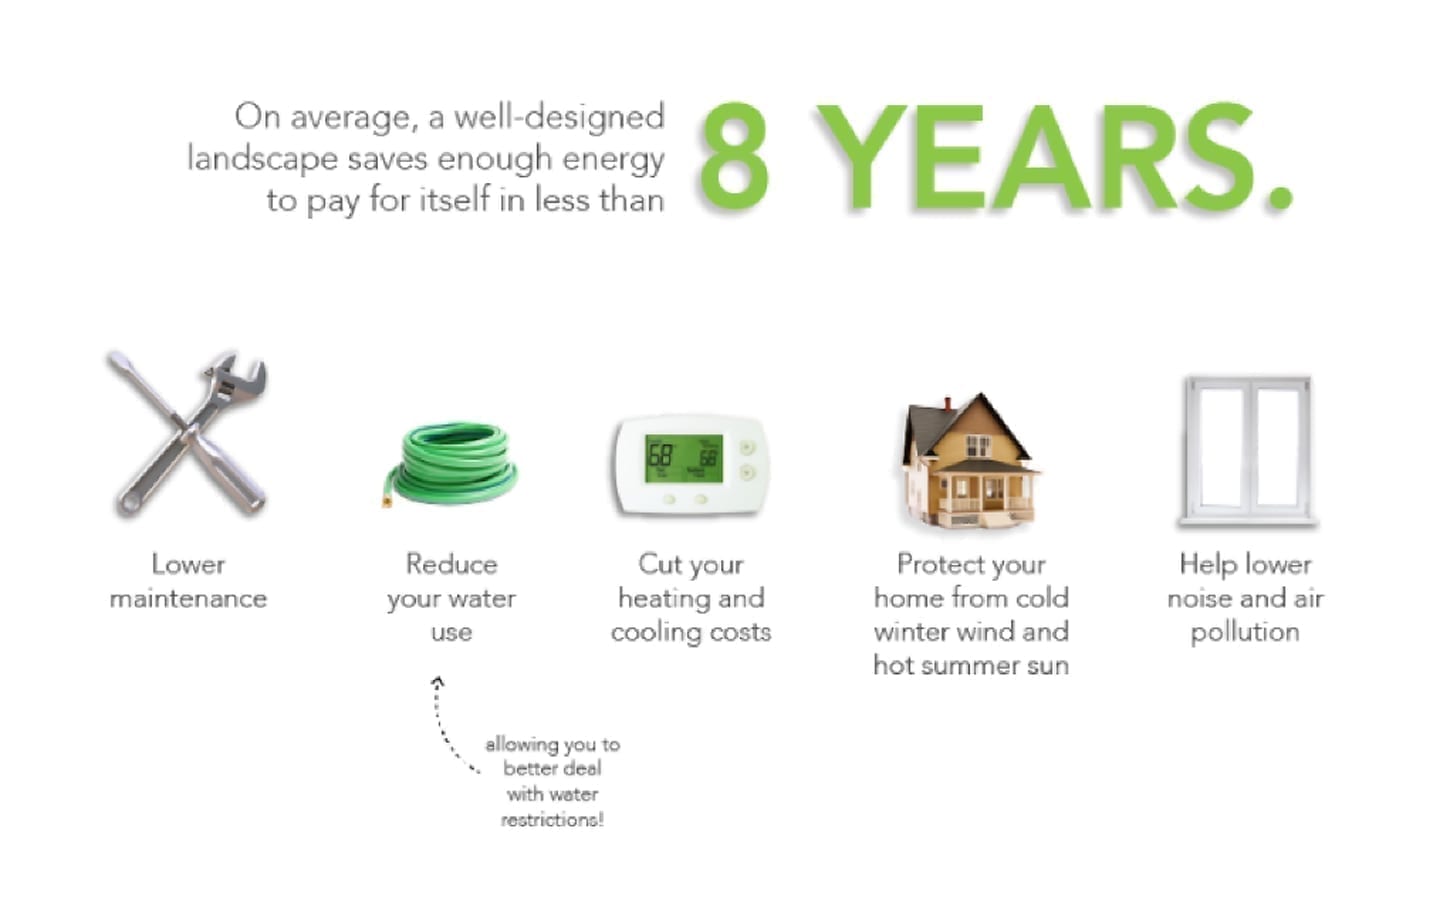 graphic detailing the energy saving benefits of a well-designed home landscape